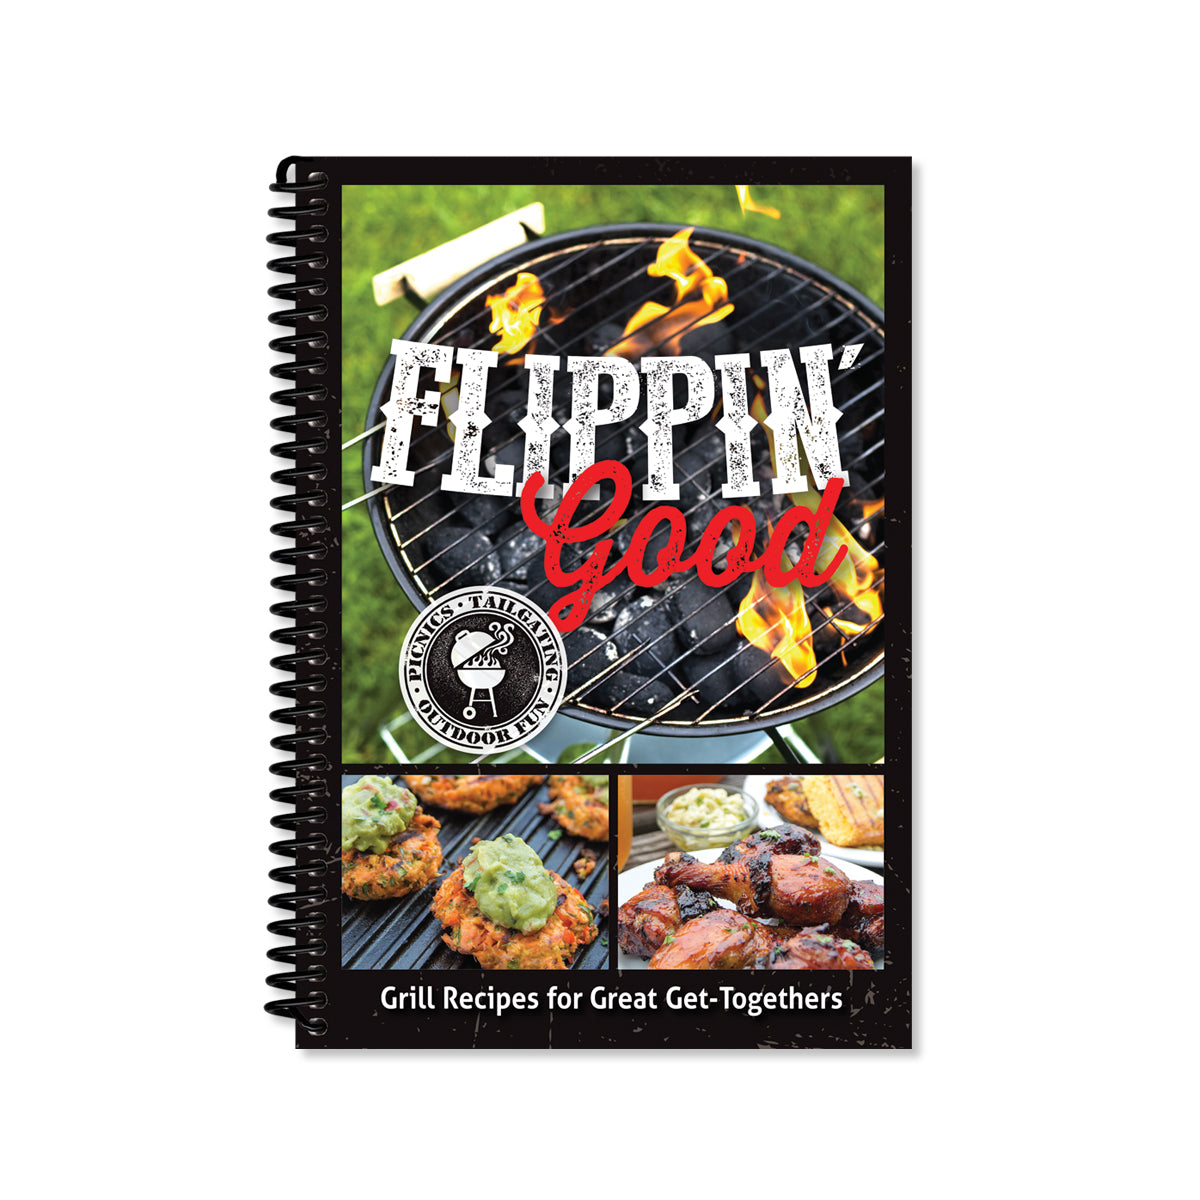 Book Cover of Flippin' Good, picnics, tailgating, outdoor fun.